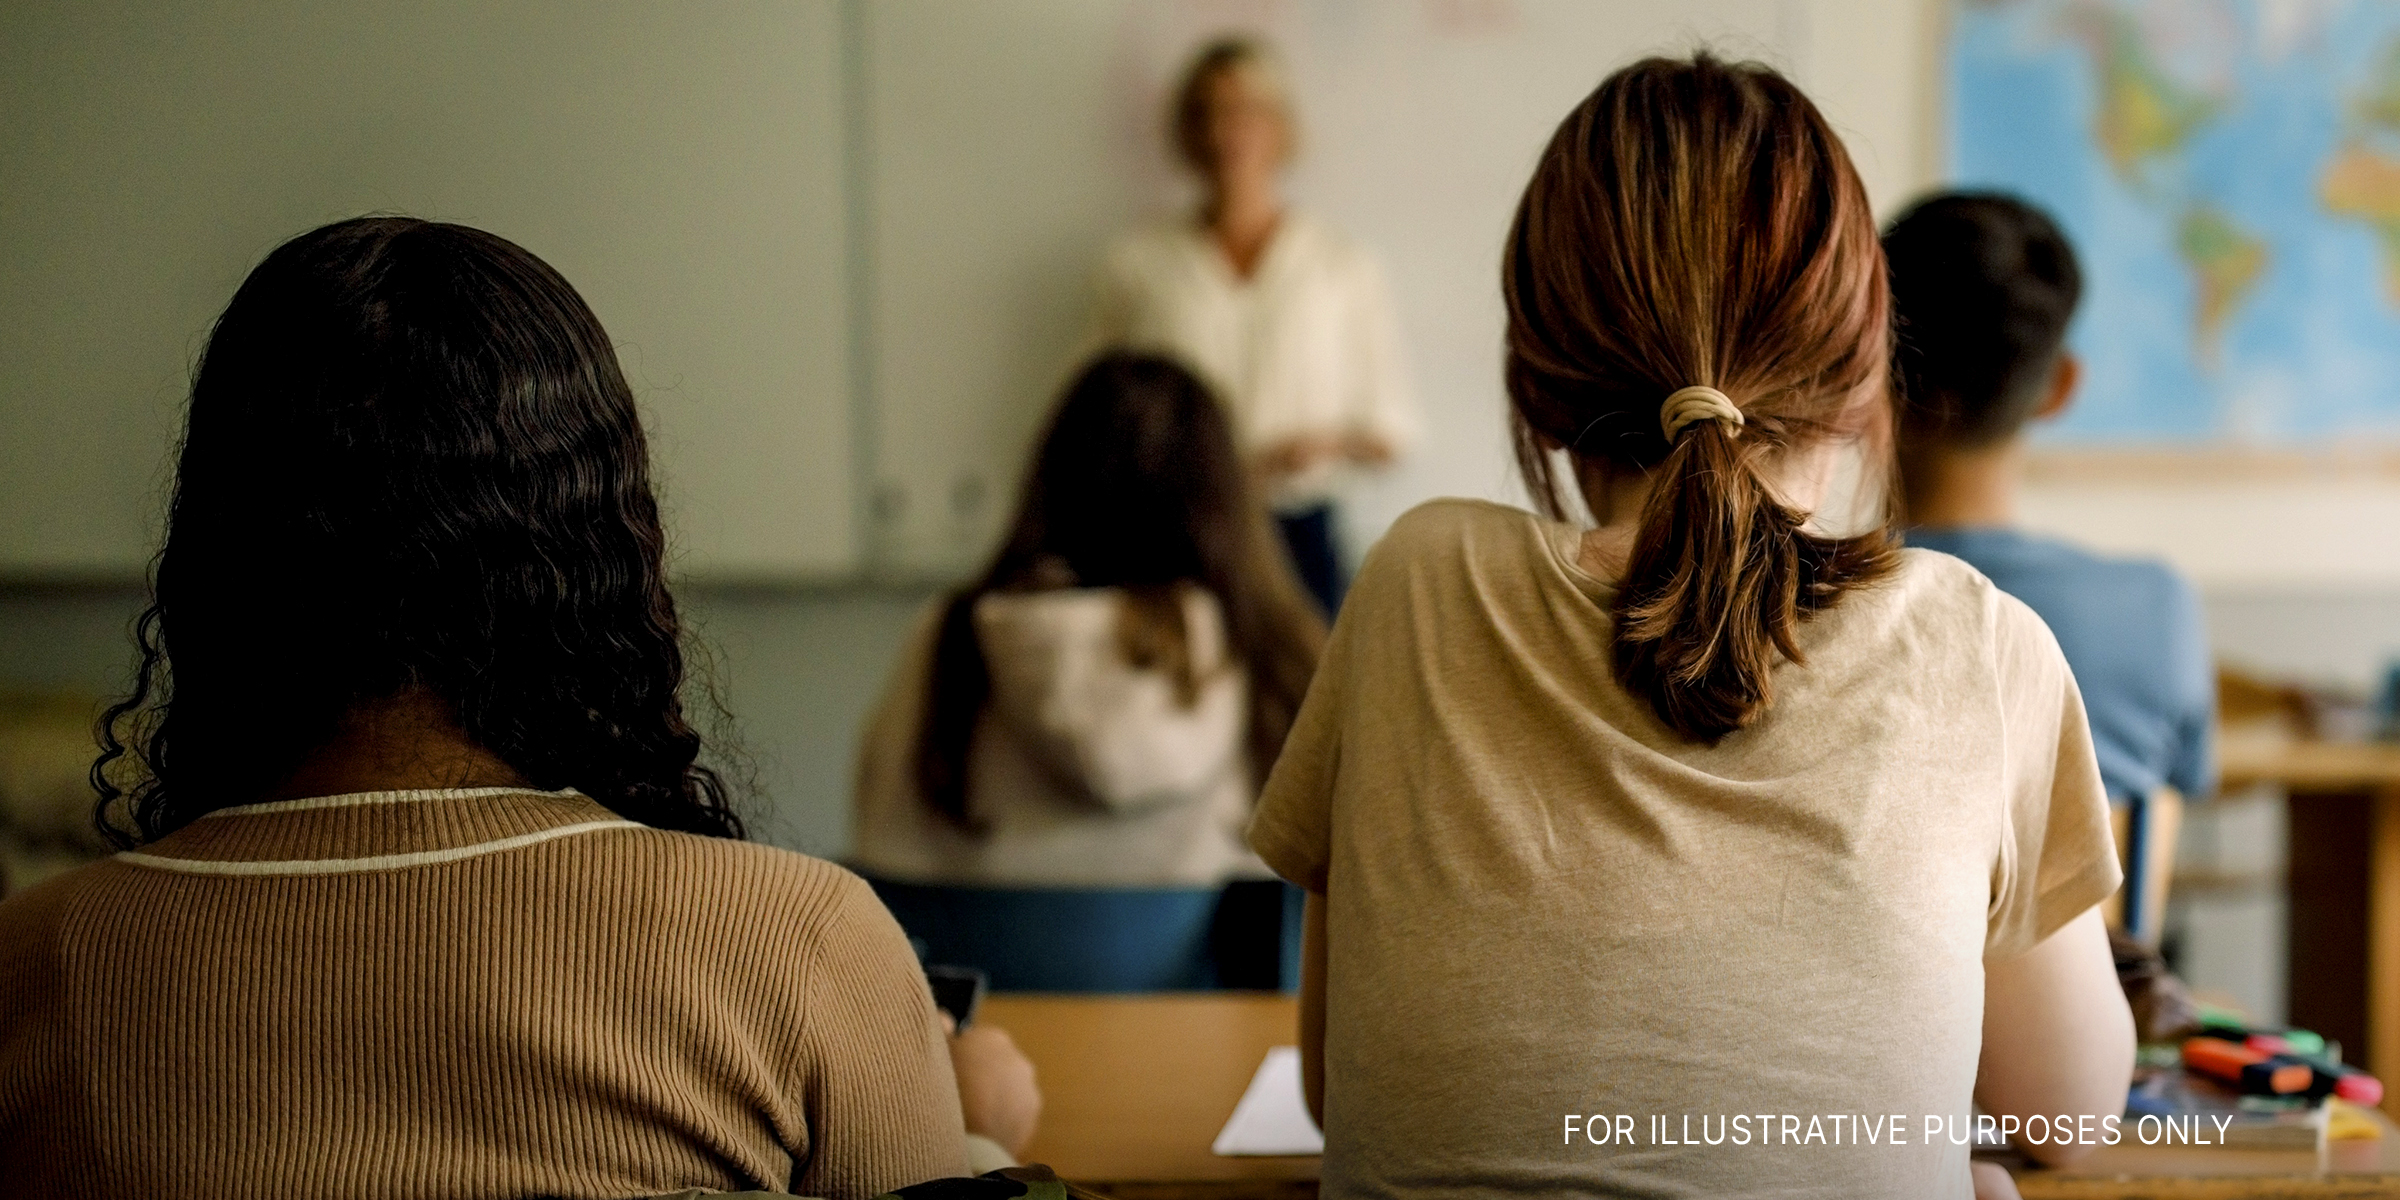 Teenage girls and boys learning in classroom | Source: Getty Images